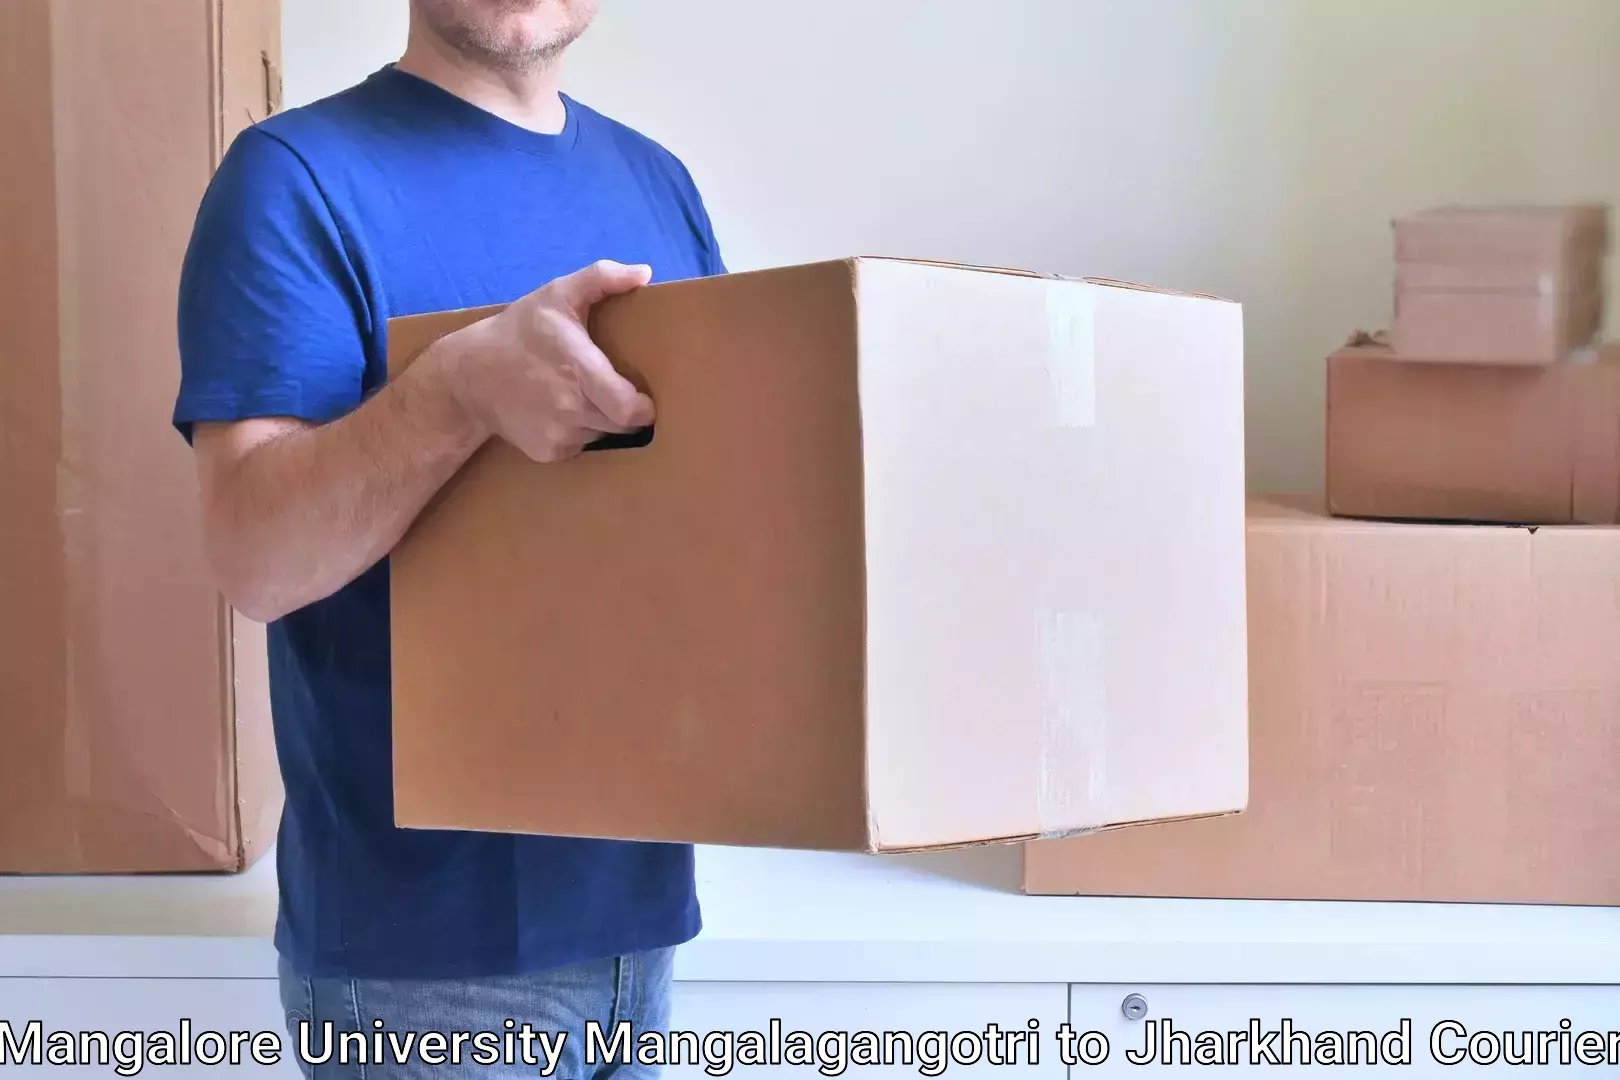 Cost-effective courier solutions Mangalore University Mangalagangotri to Jharkhand